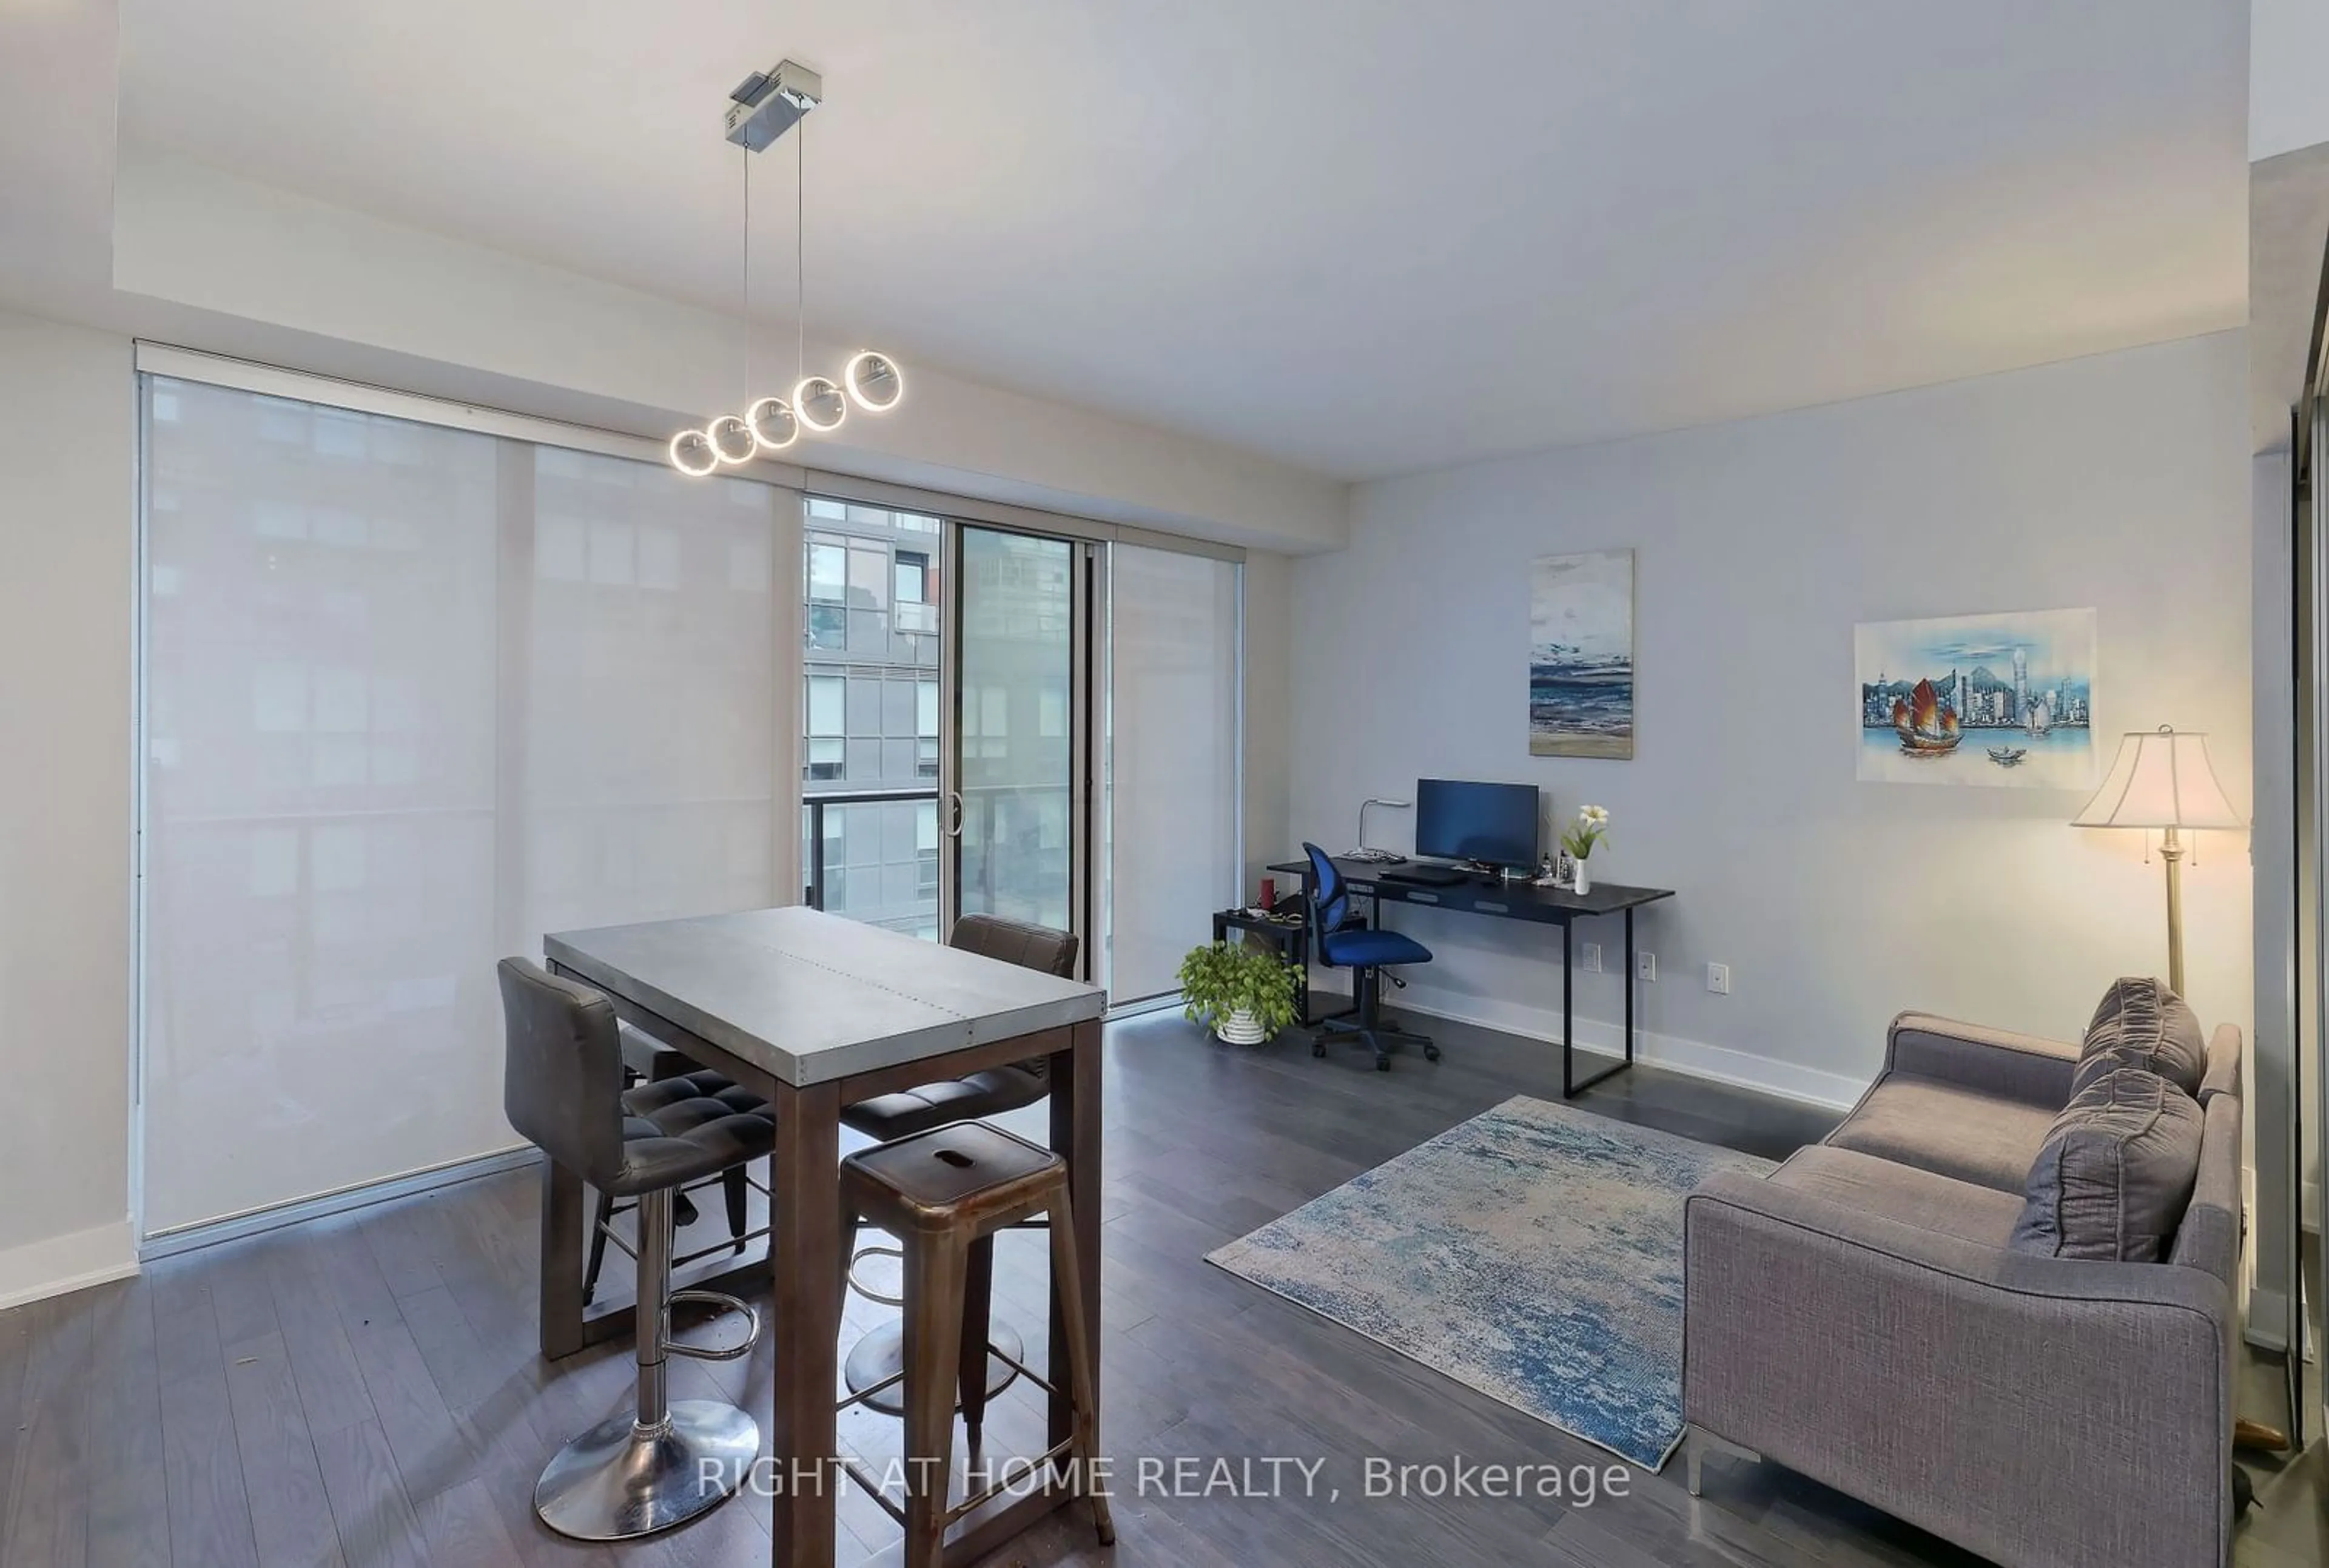 A pic of a room for 955 Bay St #605, Toronto Ontario M5S 2A2